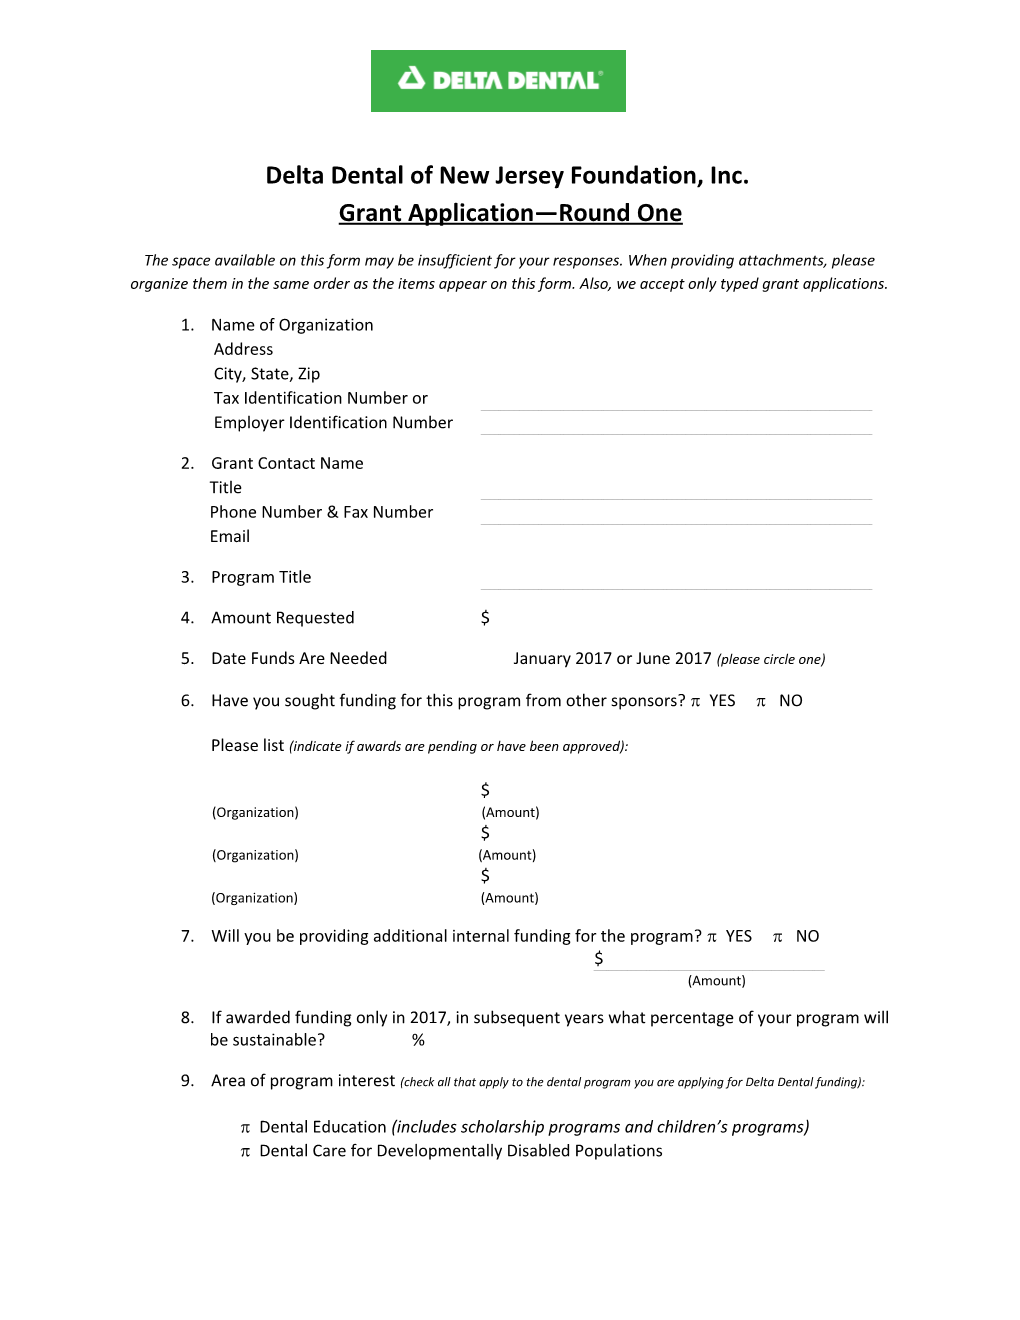 Delta Dental of New Jersey Foundation, Inc. Grant Application Round One